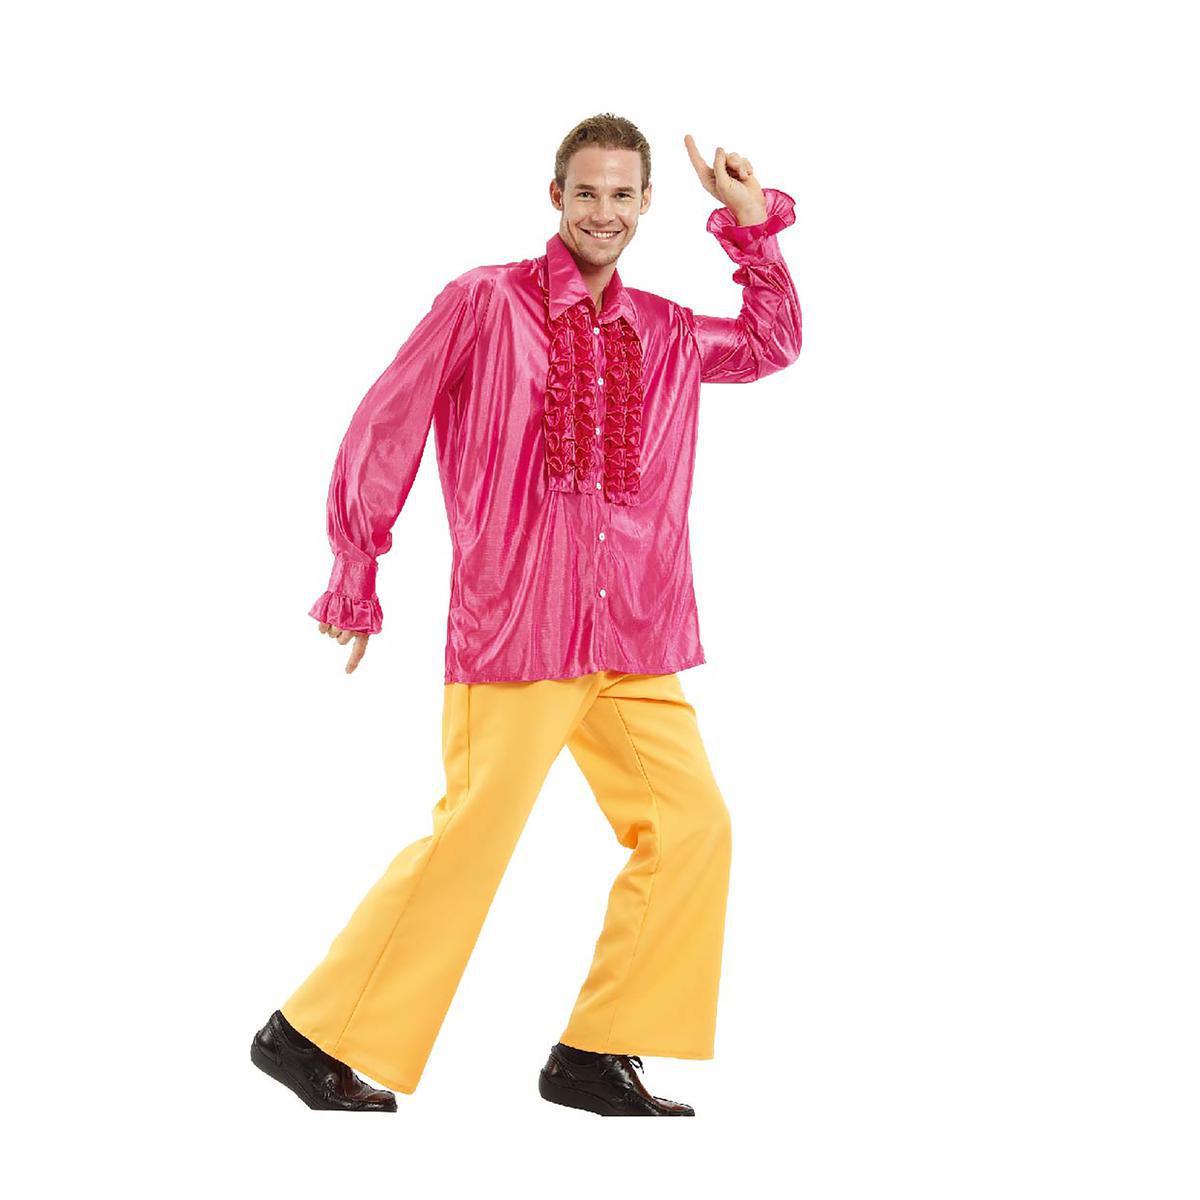 Chemise homme disco - Polyester - Taille adulte - Orange ou rose